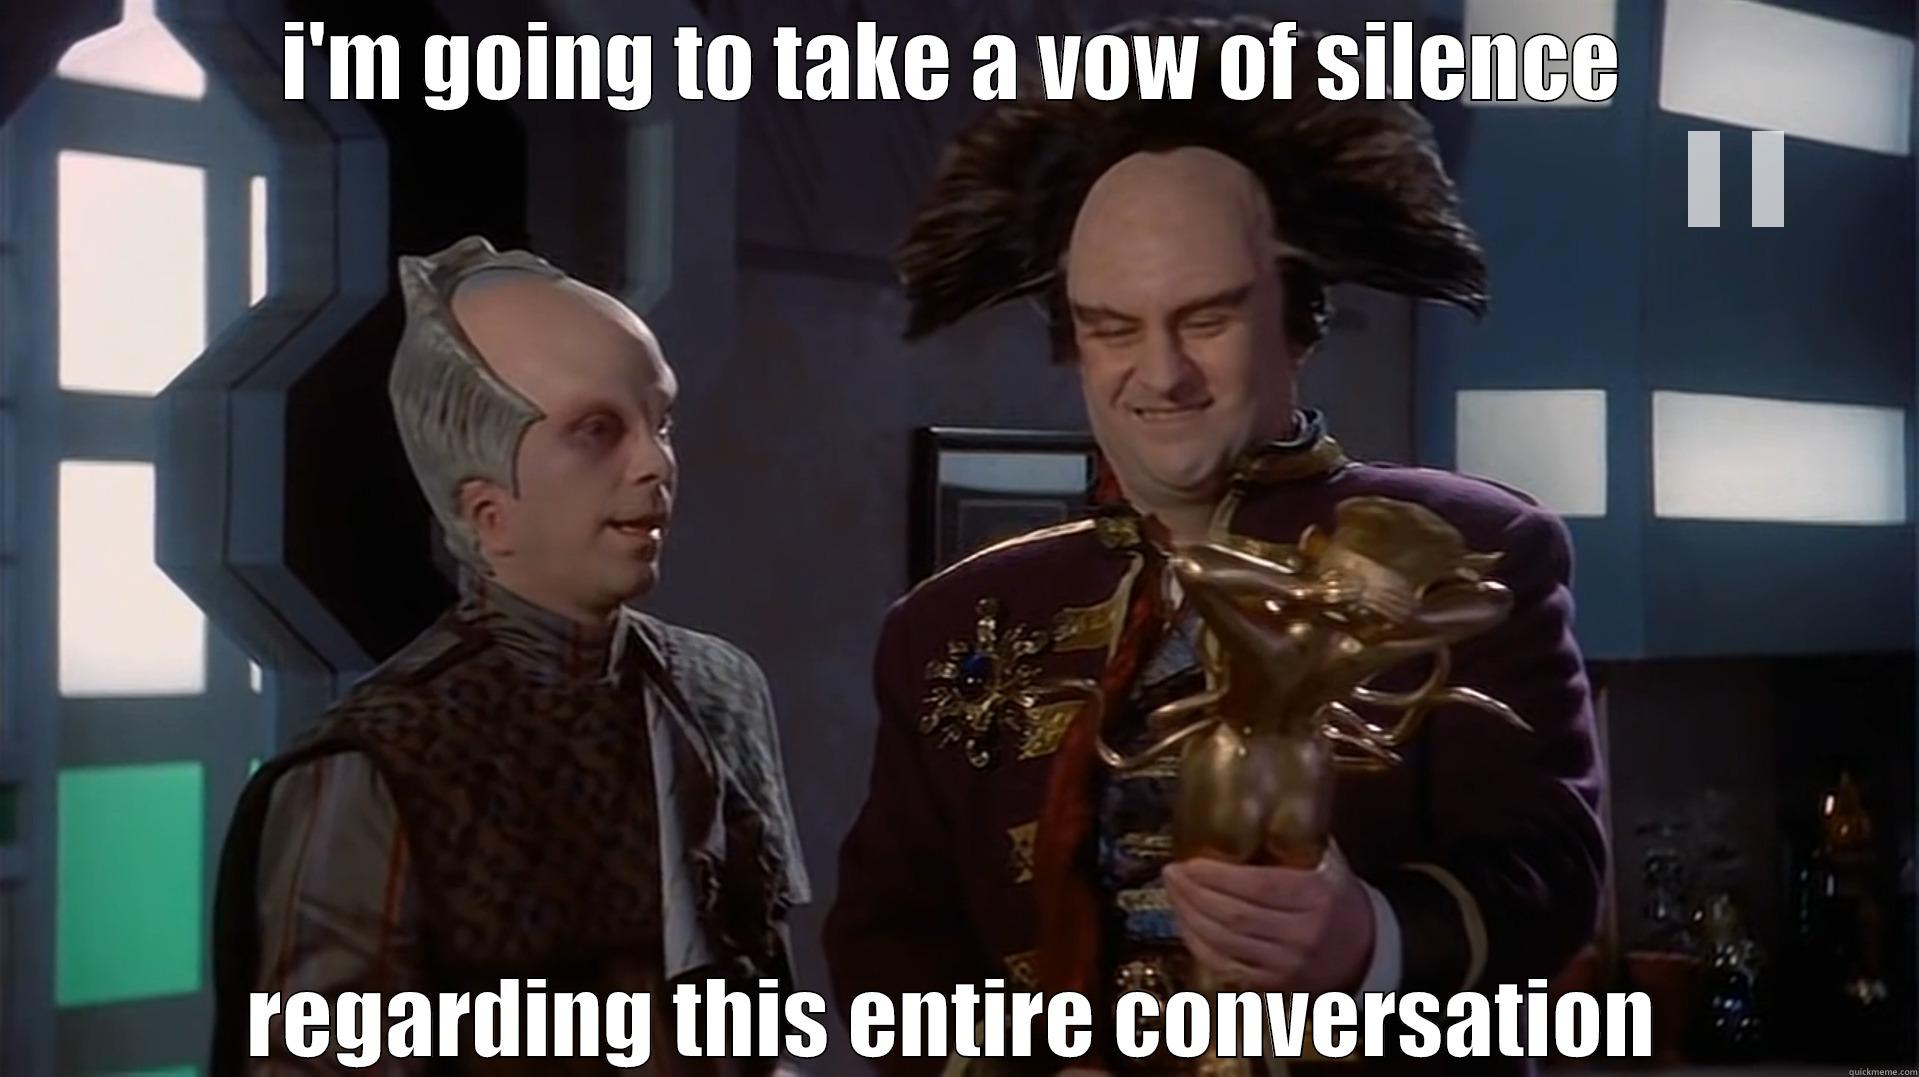 vow of silence - I'M GOING TO TAKE A VOW OF SILENCE REGARDING THIS ENTIRE CONVERSATION Misc